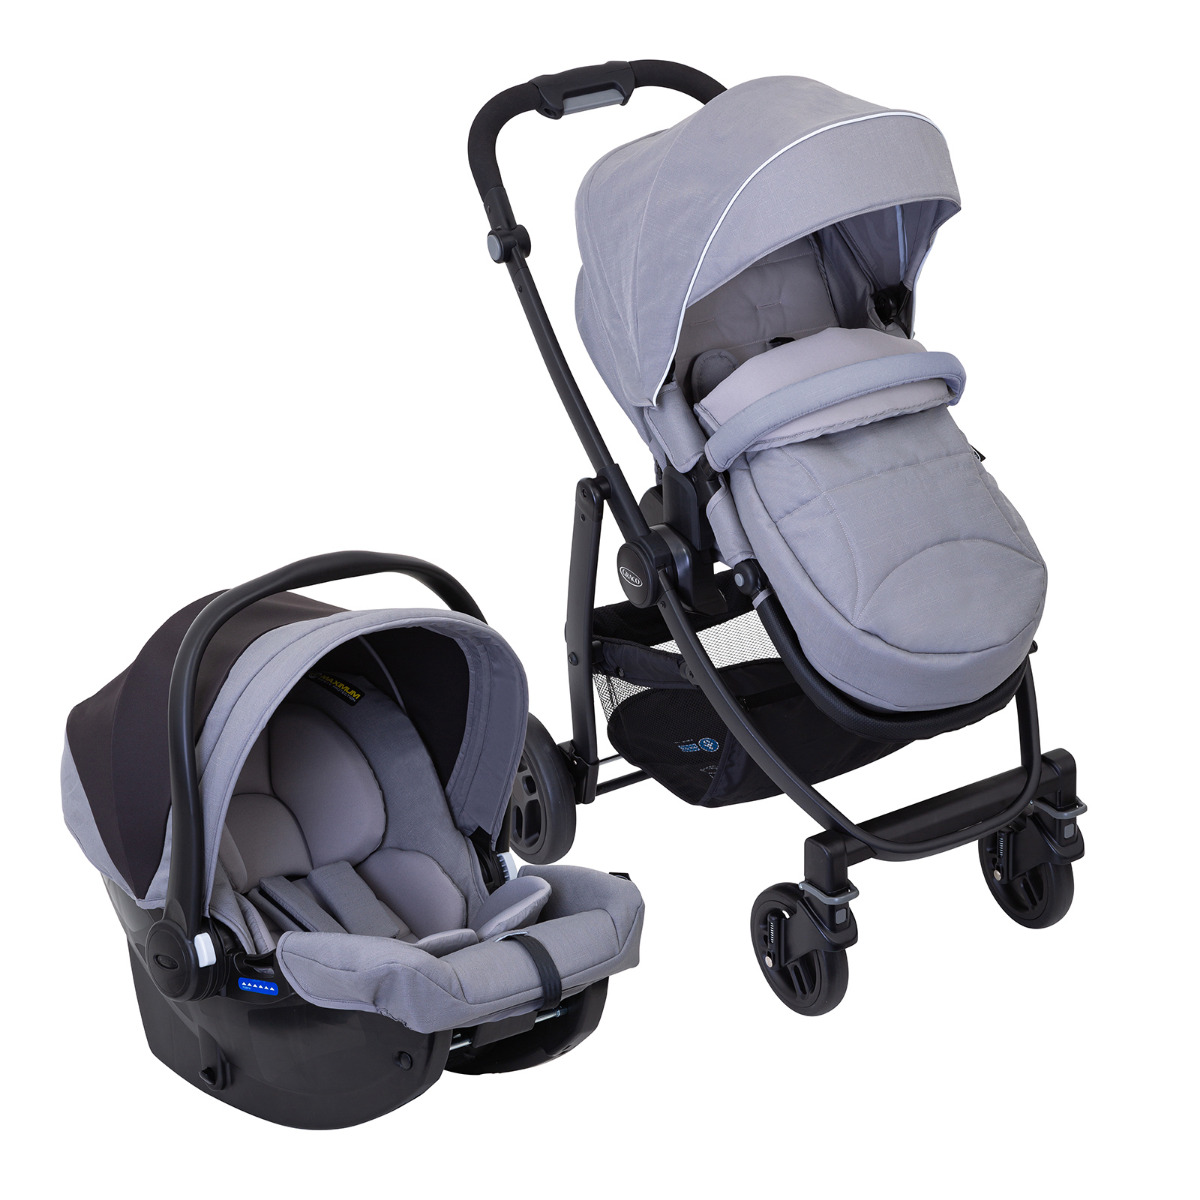 Graco Evo Travel system with Graco Evo pushchair and SnugEssentials i-Size infant car seat